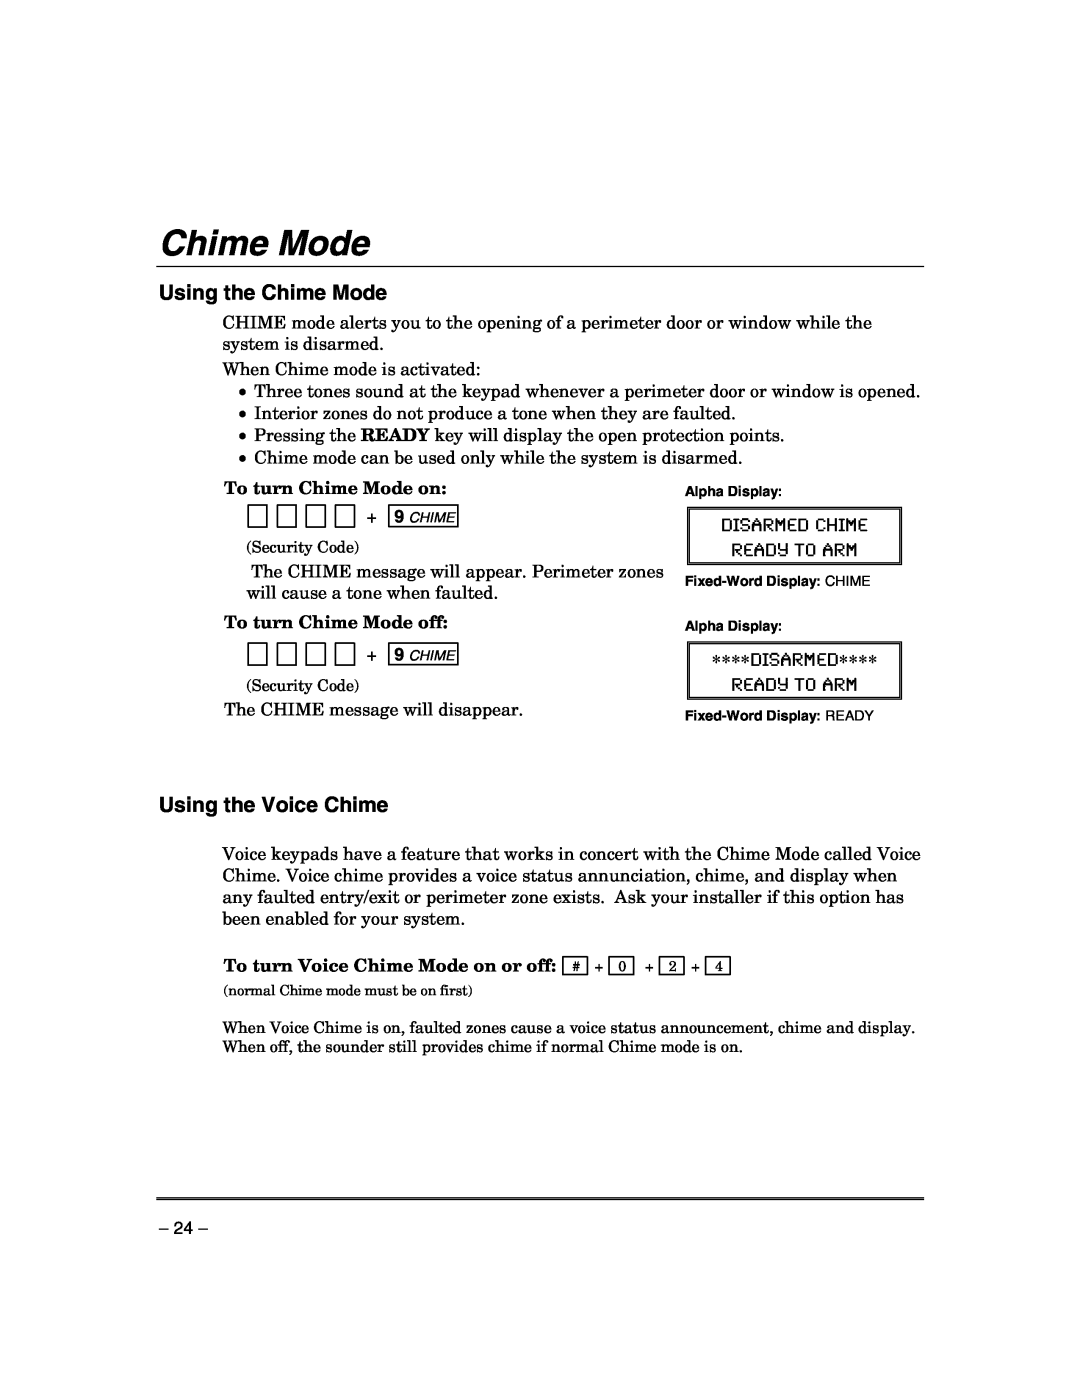 Honeywell VISTA-21IPSIA manual Using the Chime Mode, Using the Voice Chime, Disarmed Chime Ready To Arm 